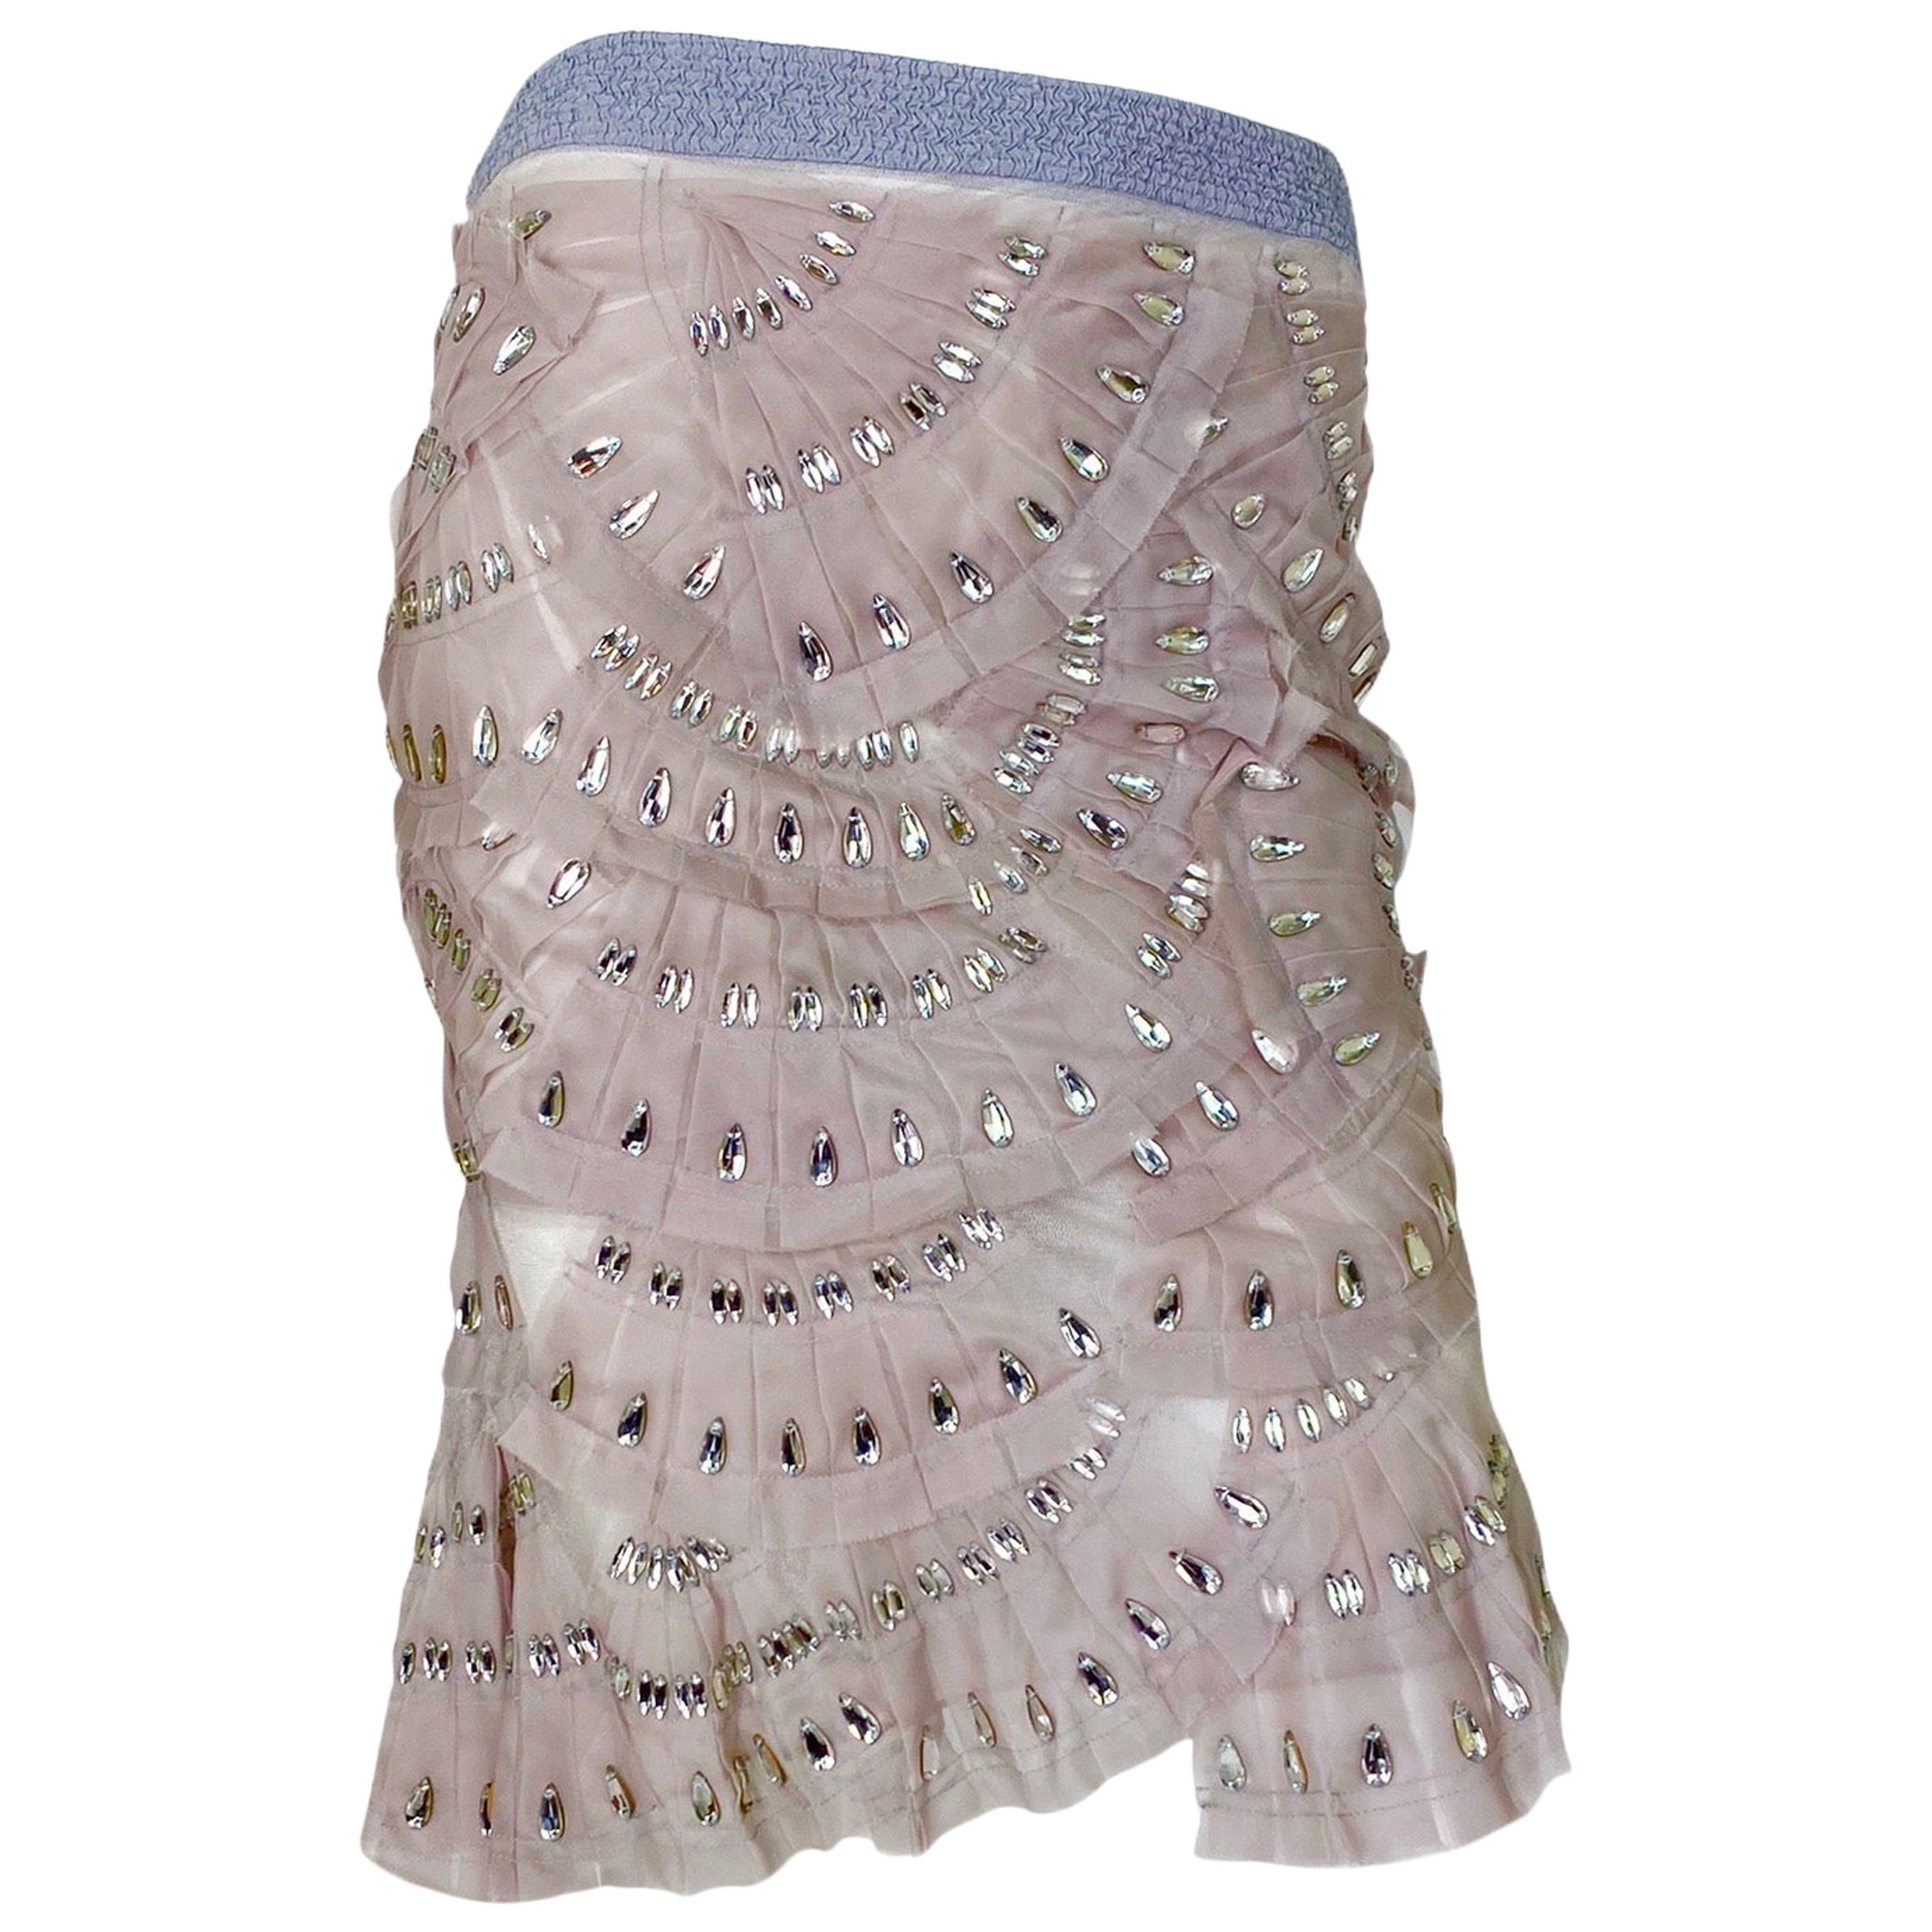 S/S 2004 Vintage Tom Ford for Gucci Runway Crystal Embellished Skirt Size 40 NWT For Sale